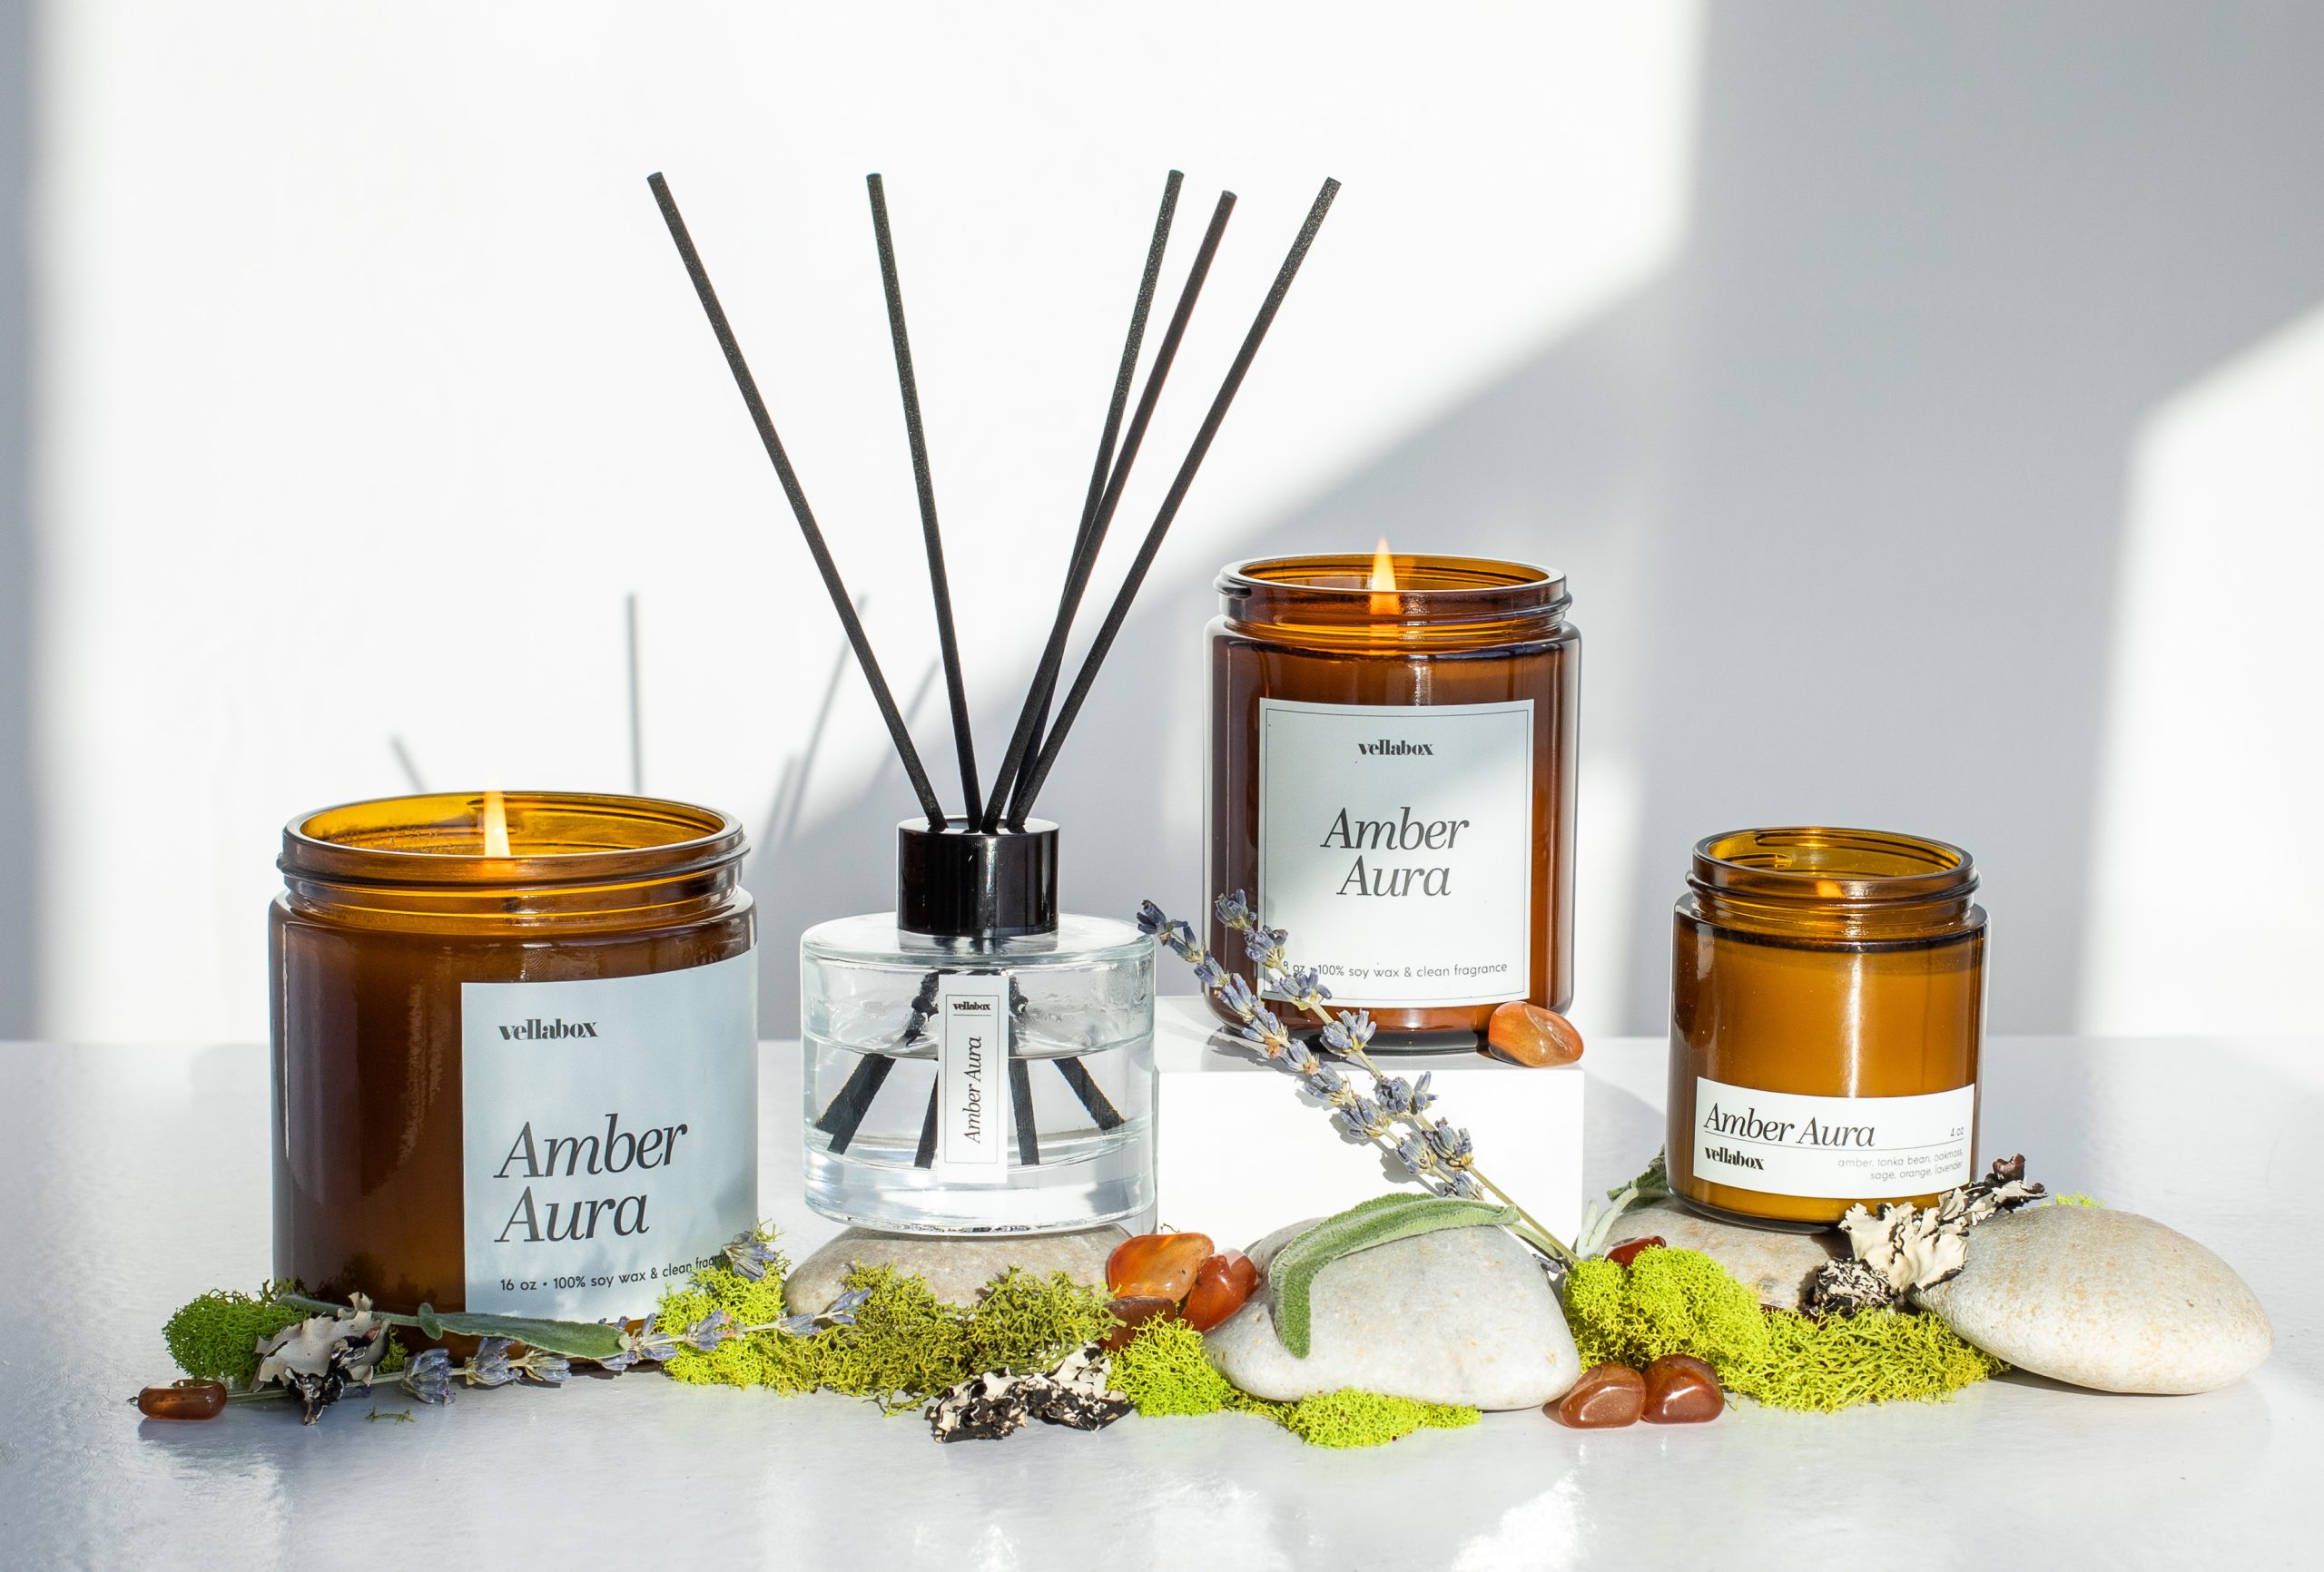 amber aura scent group image